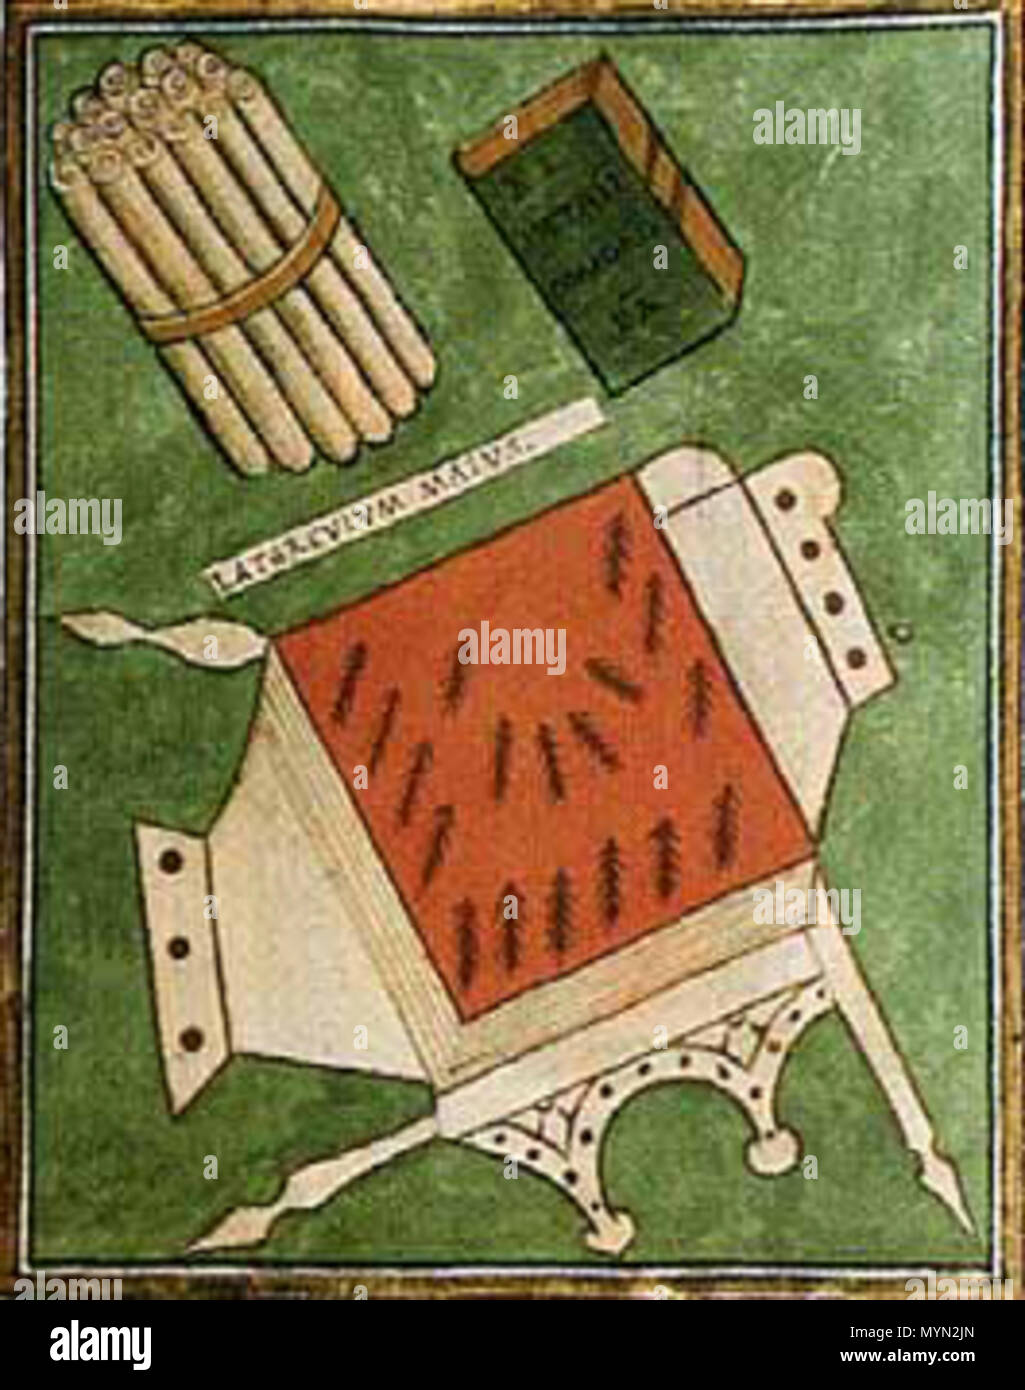 . English: Page from the Notitia Dignitatum, displaying the insignia and items associated with the office of primicerius notariorum, a late Roman palace chancery official. 15th century. Peronet Lamy (died 1453), based on Roman originals 392 Notitia Dignitatum - Primicerius notariorum Stock Photo